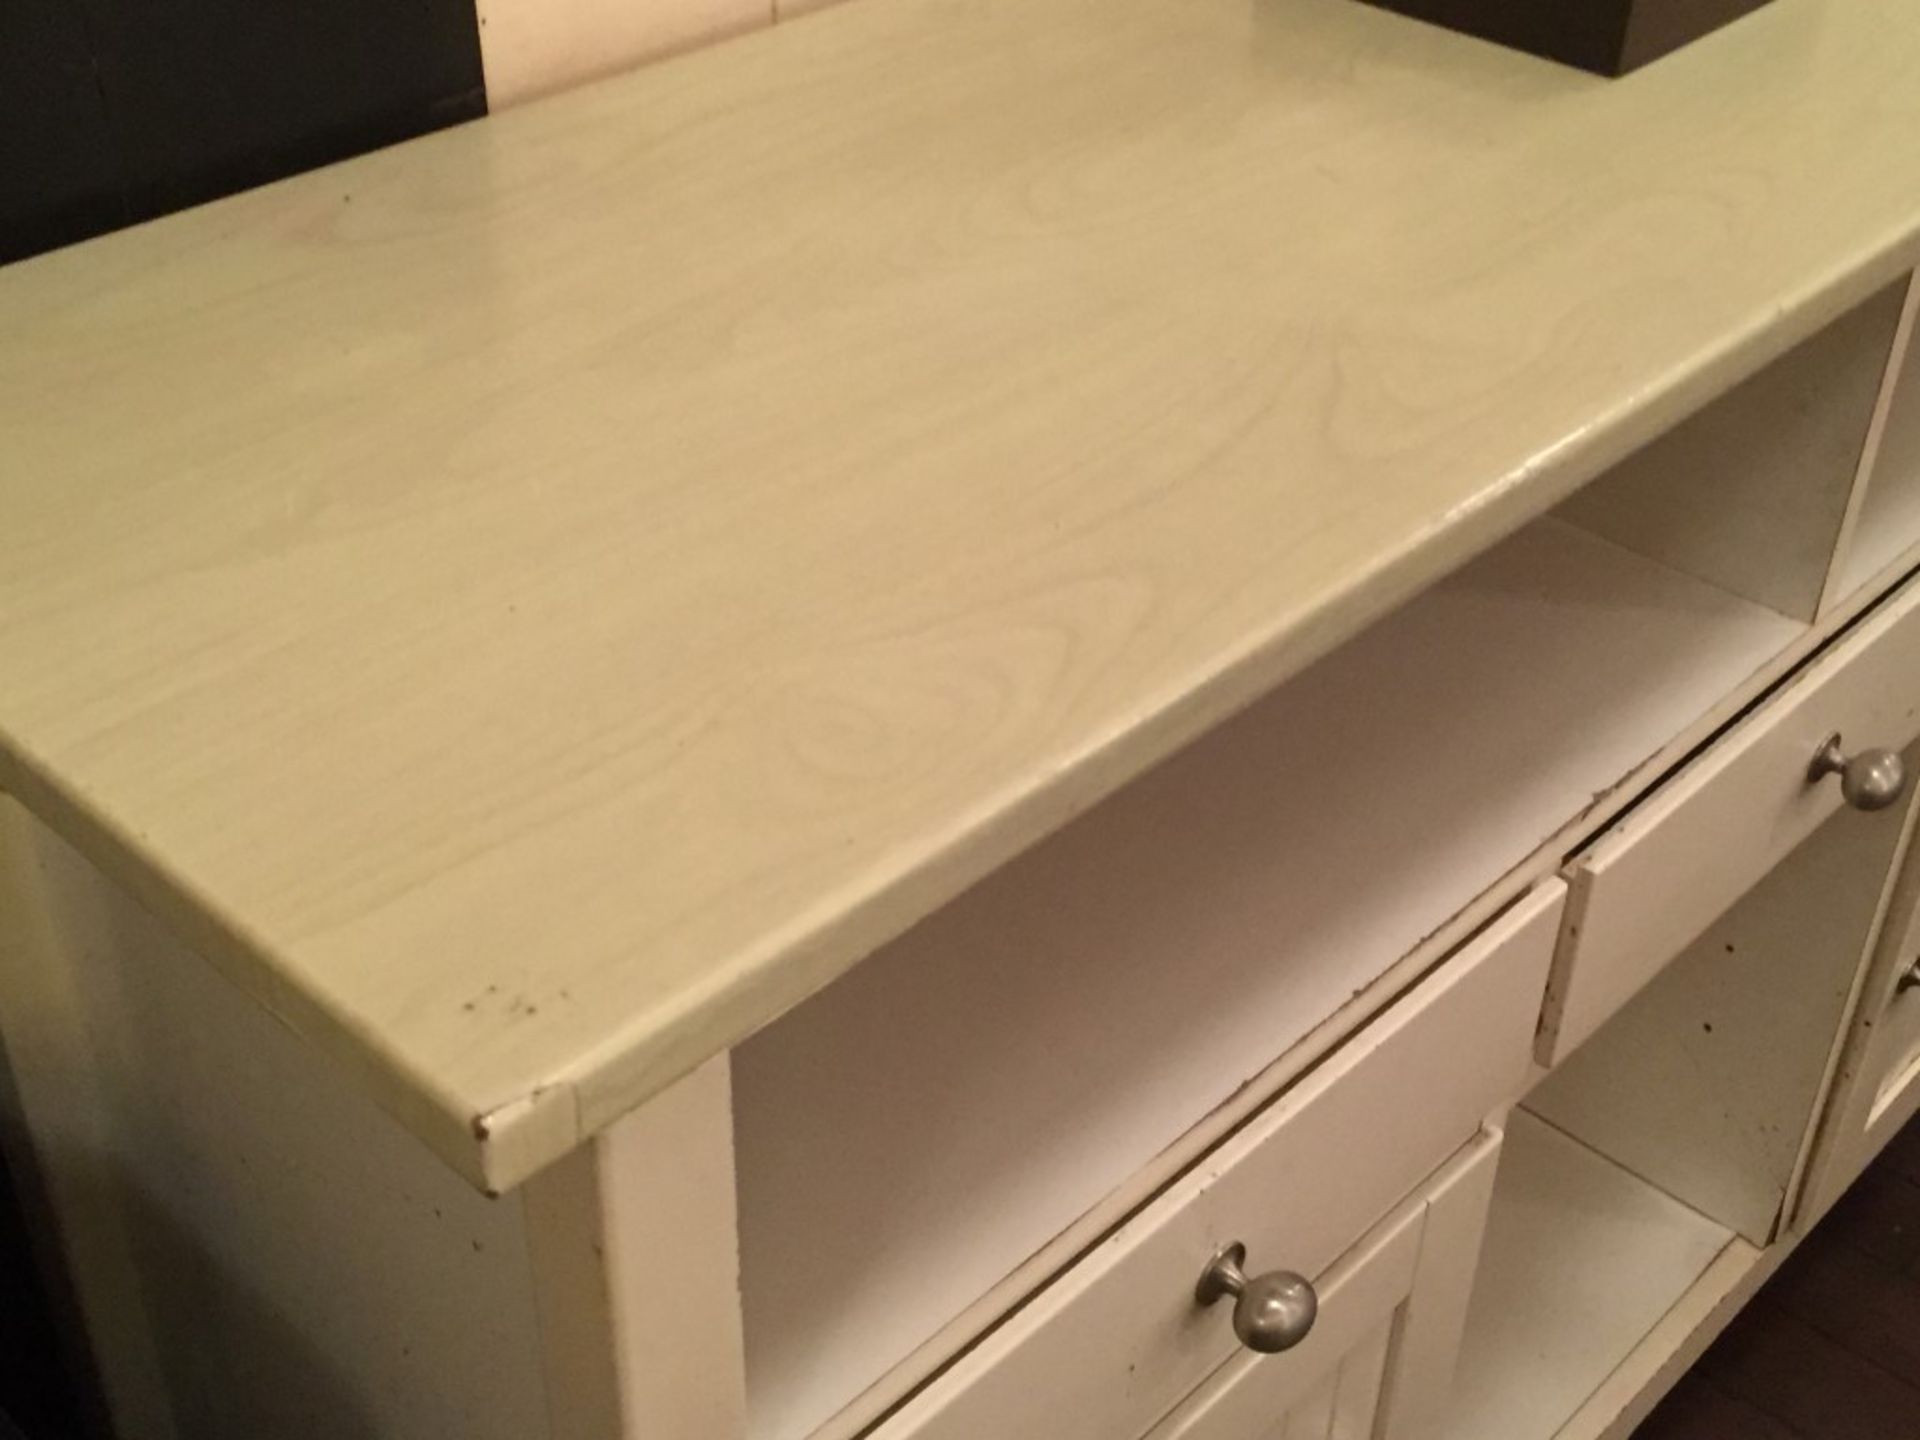 1 x Wooden Shabby Chic Sideboard Server - Dimensions: W143 x D42 x H97cm - Ref: APB022 - City Centre - Image 3 of 3